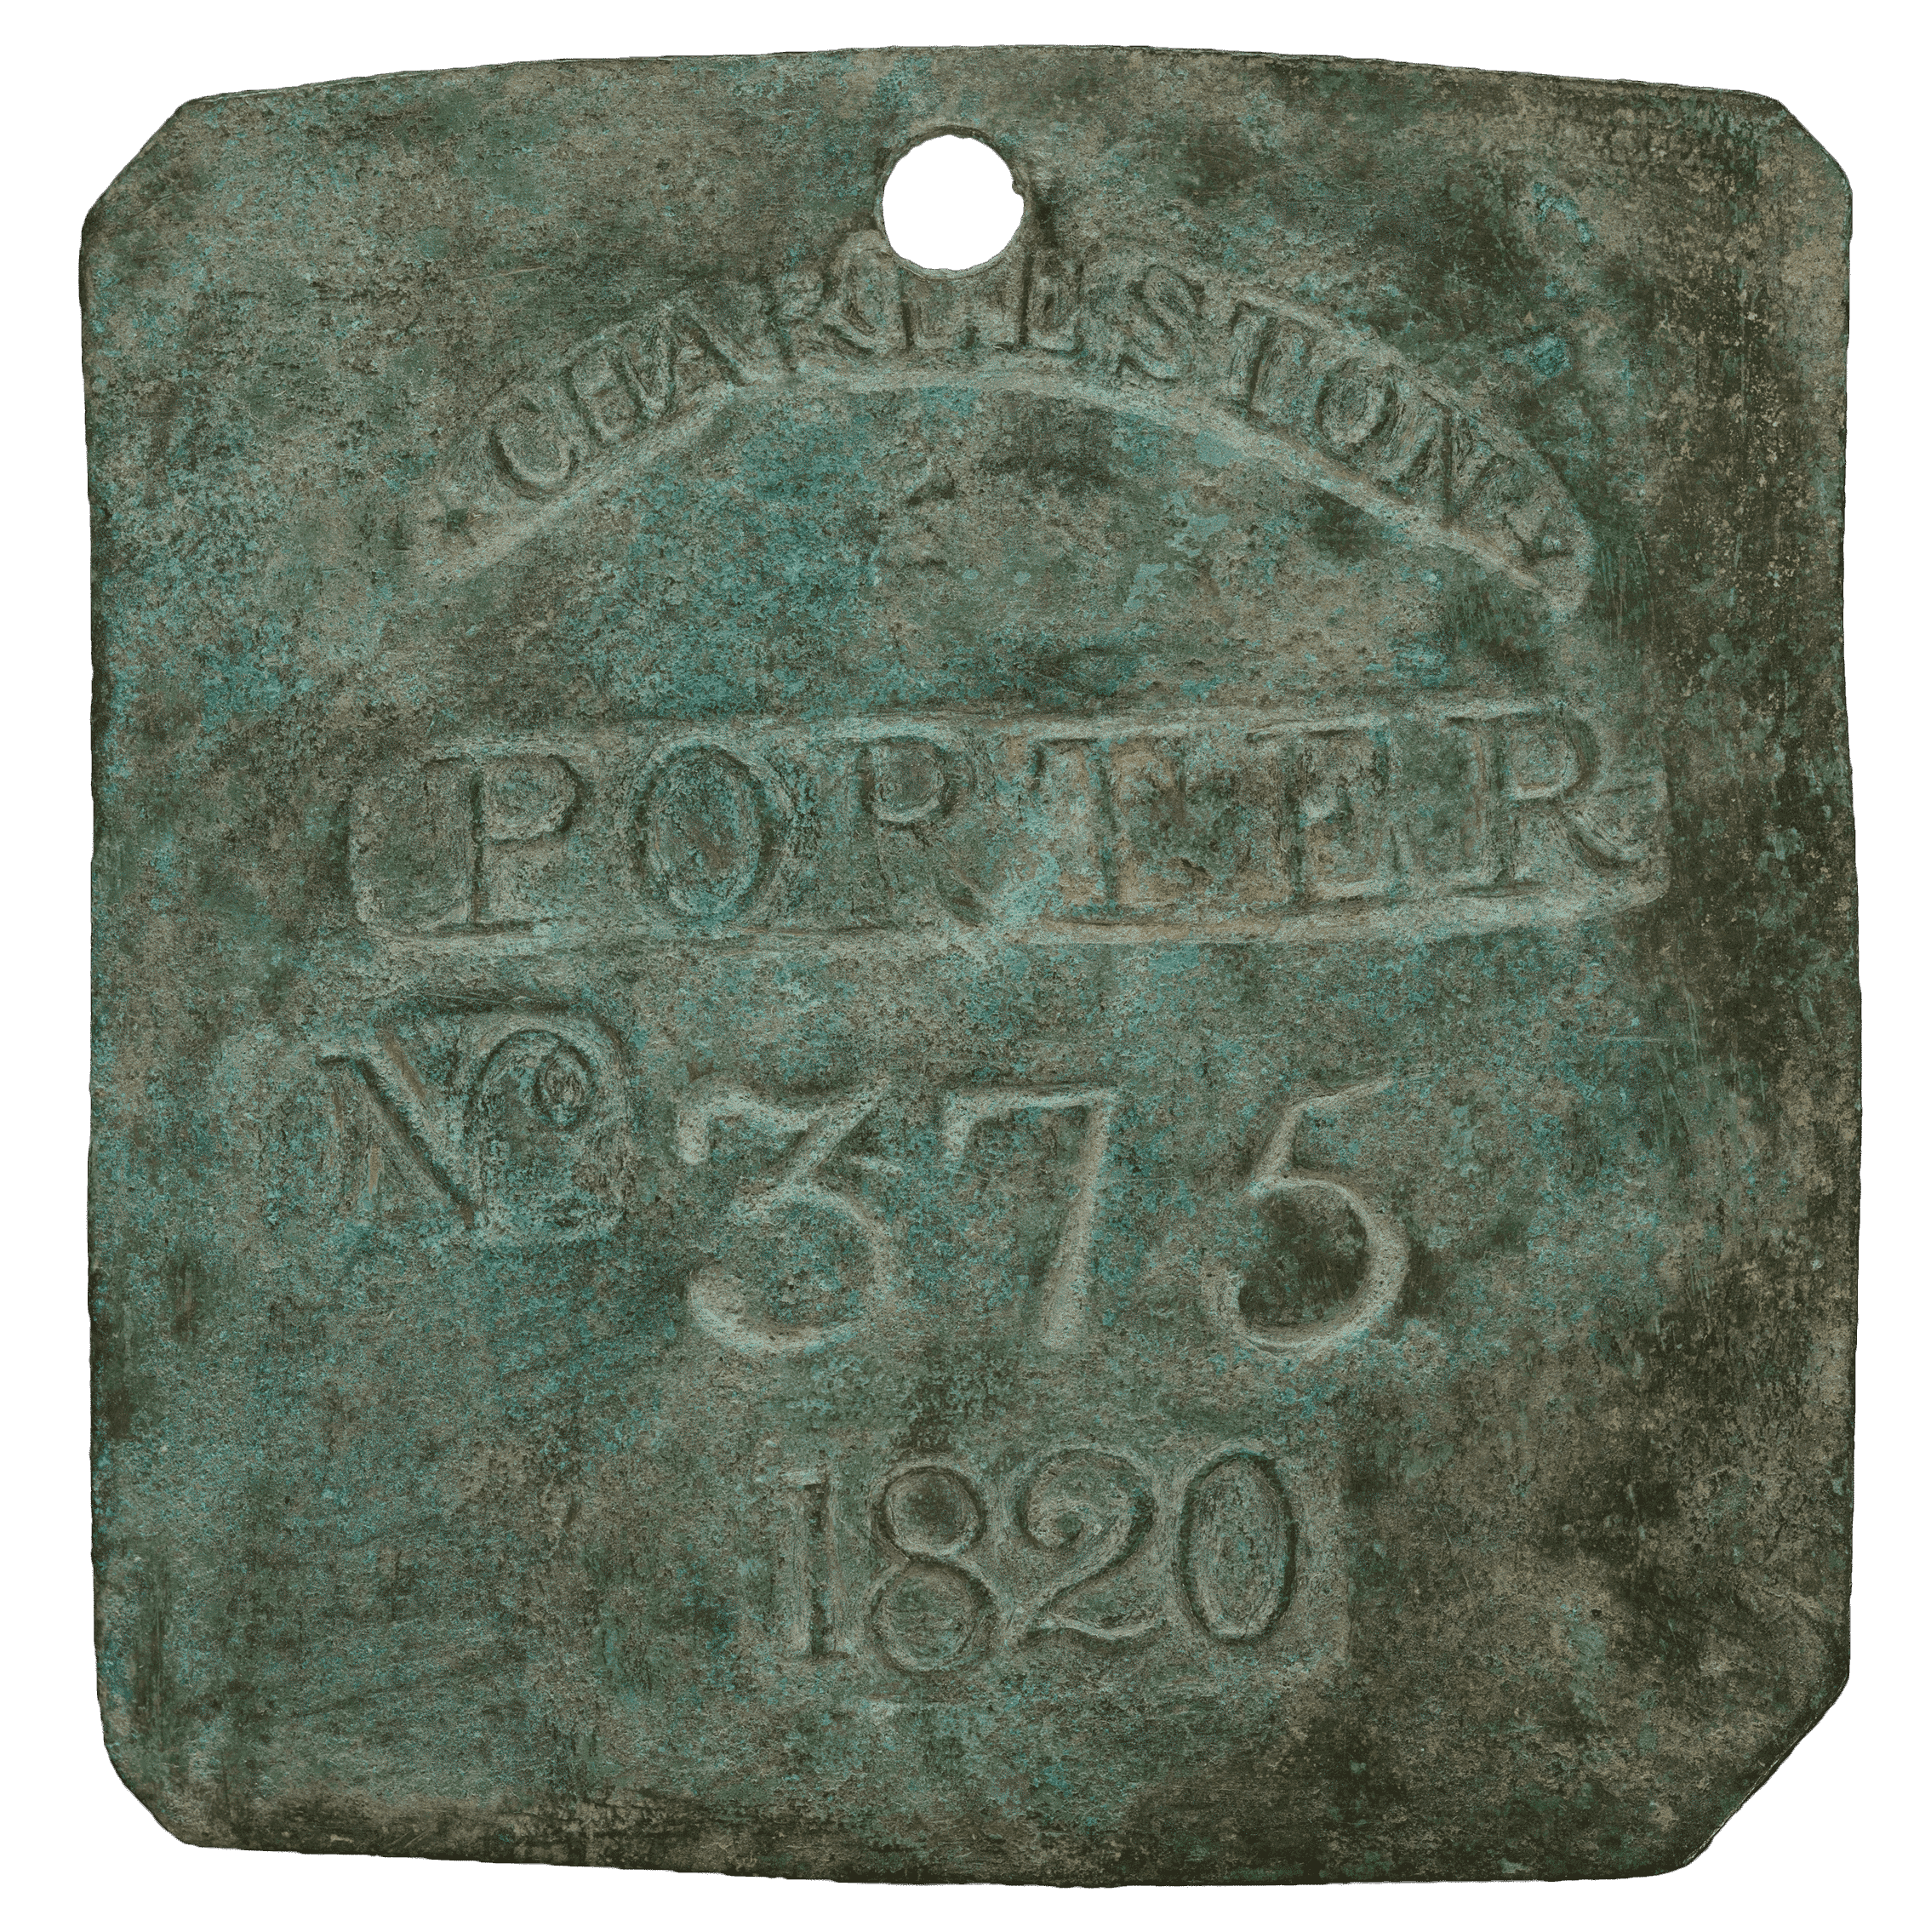 Square metal badge with clipped corners.  It is engraved "CHARLESTON / PORTER / No. 375 / 1820"